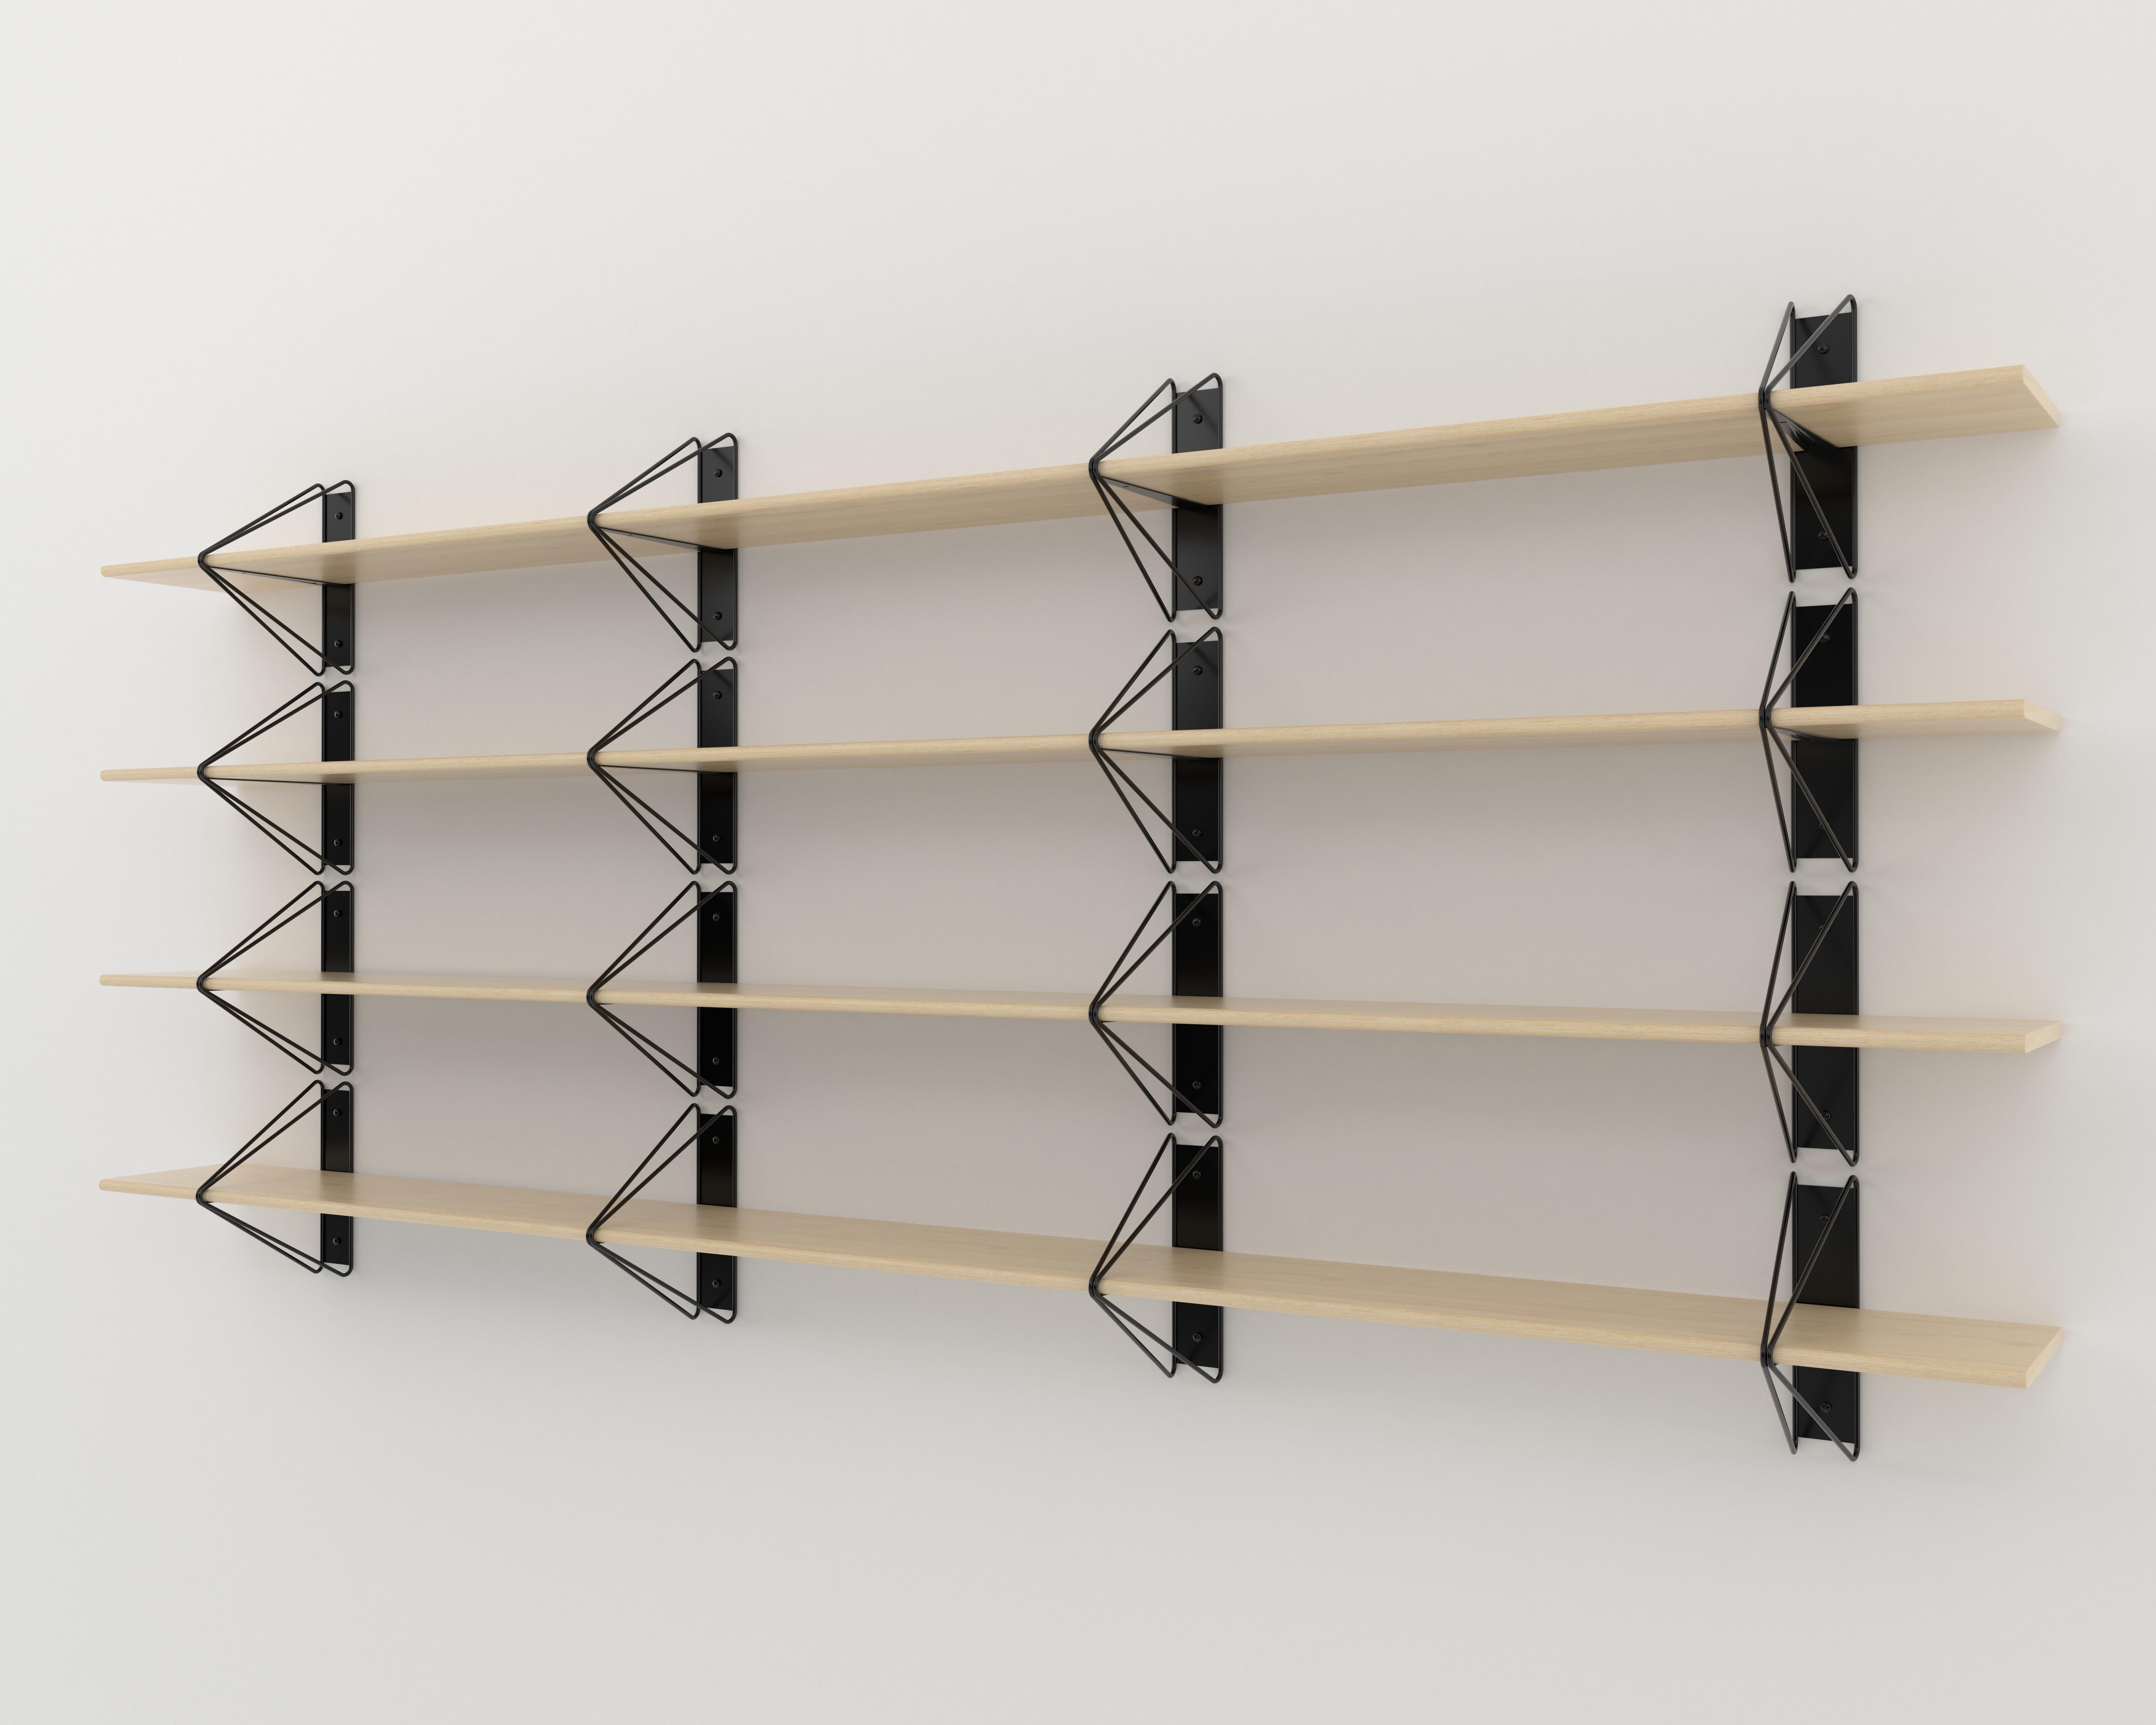 Metal Set of 5 Strut Shelves from Souda, 116in, Black and Walnut, Made to Order For Sale